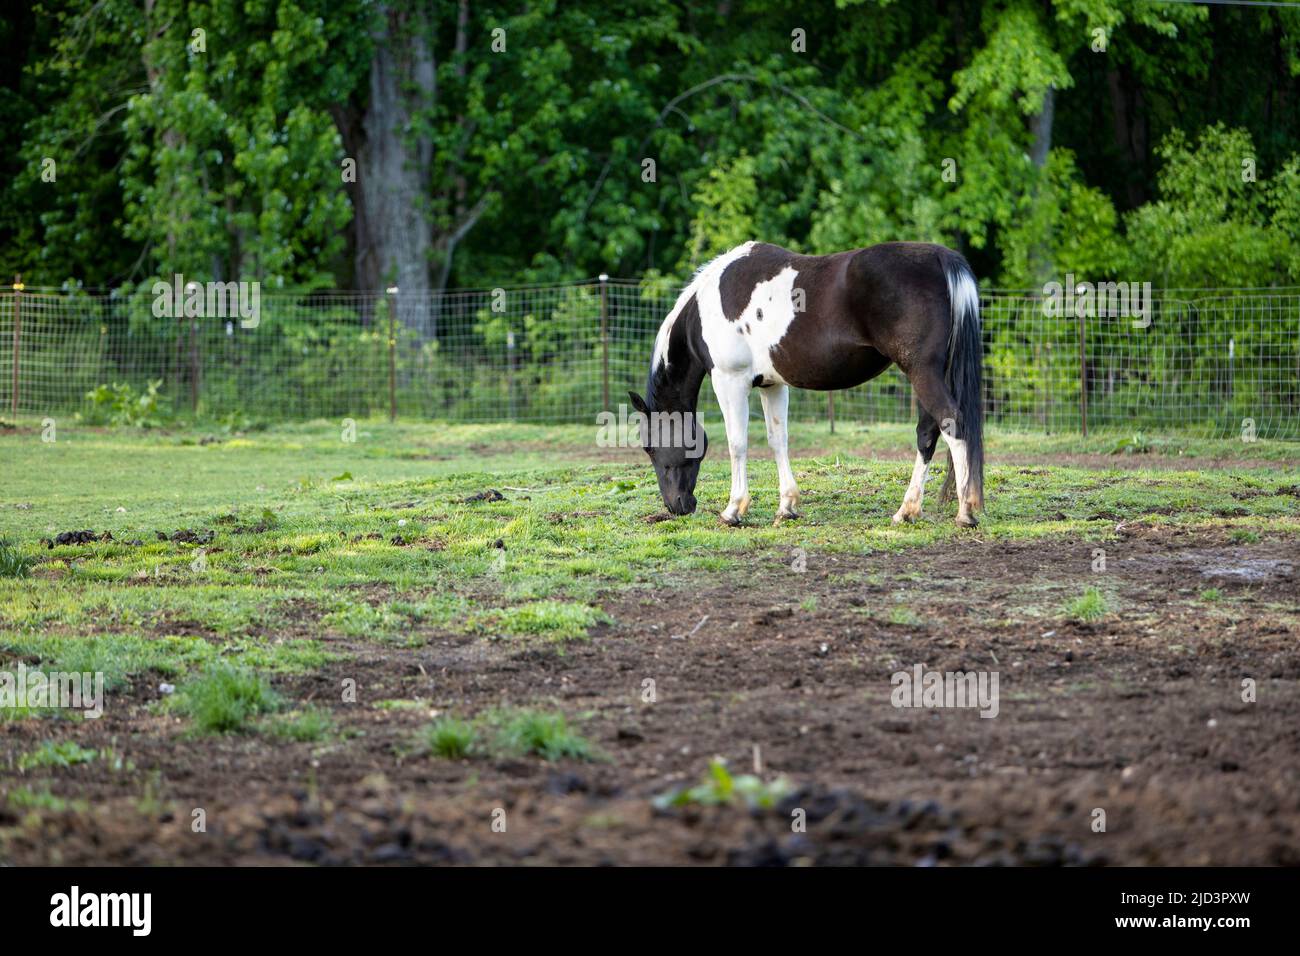 One horse grazing in a pasture. Stock Photo